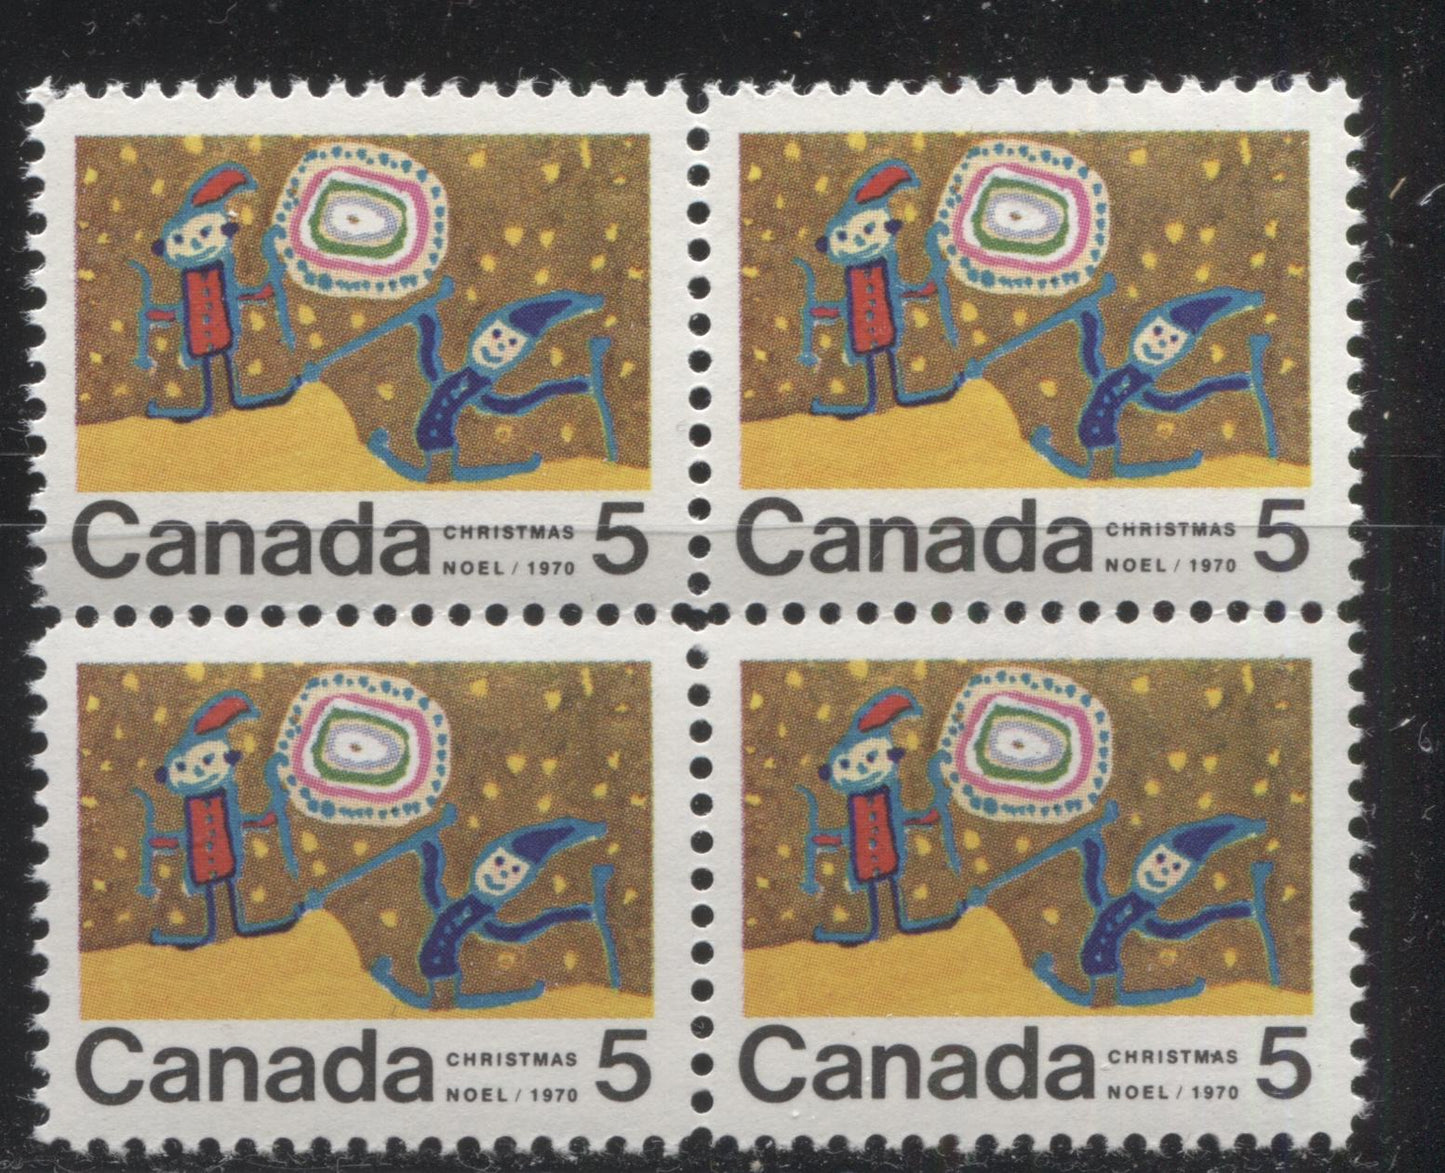 Lot 114 Canada #522i 5c Multicoloured Children Skiing, 1970 Christmas Issue, a VFNH Centre Block of 4 on HB12 Smooth Paper, With Dot Between "MA" of "Christmas" on LR Stamp, Perf. 11.9 x 11.8